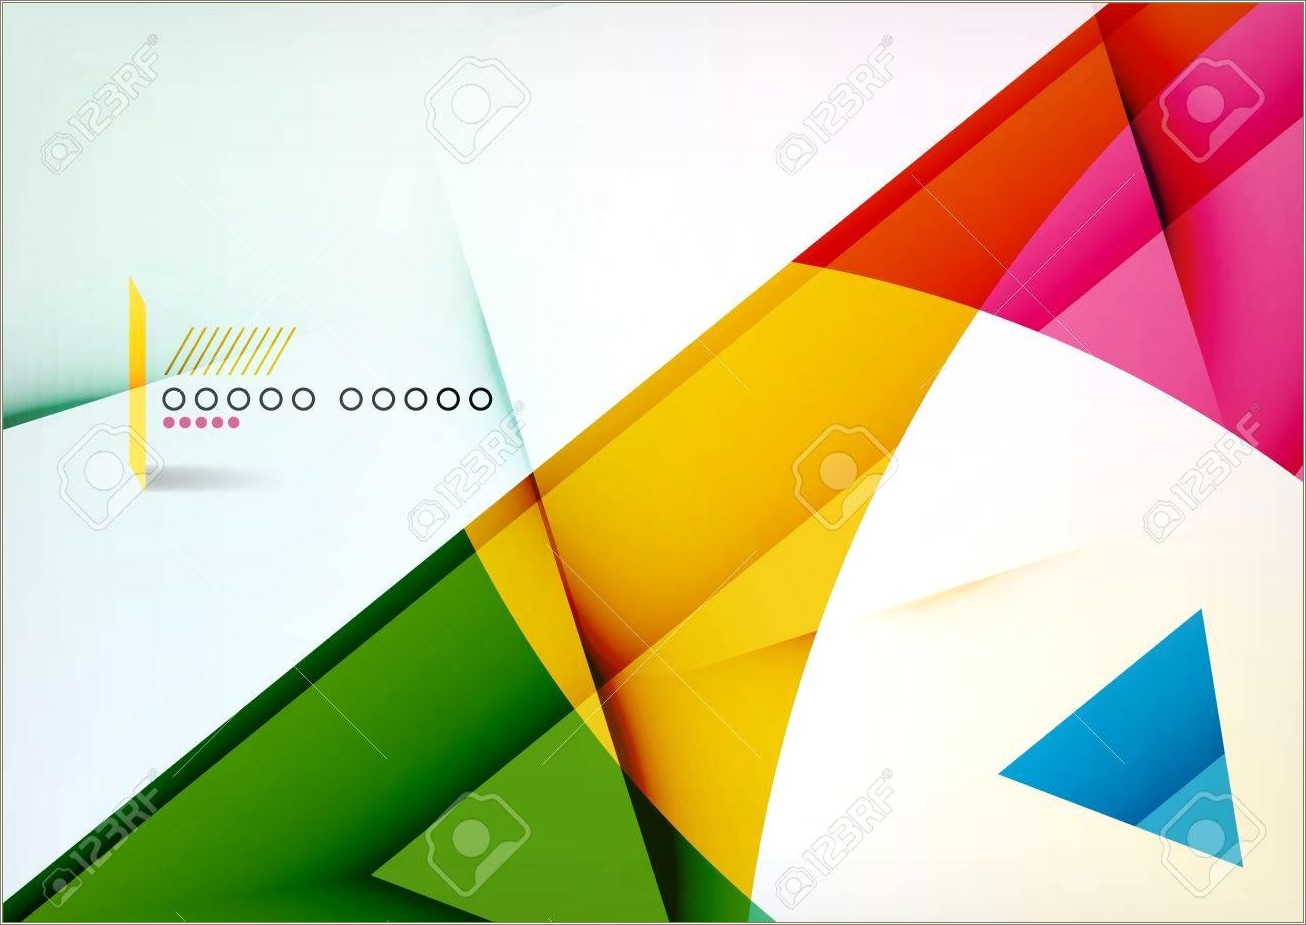 Geometric Shapes Free For Backgrounds Business Template